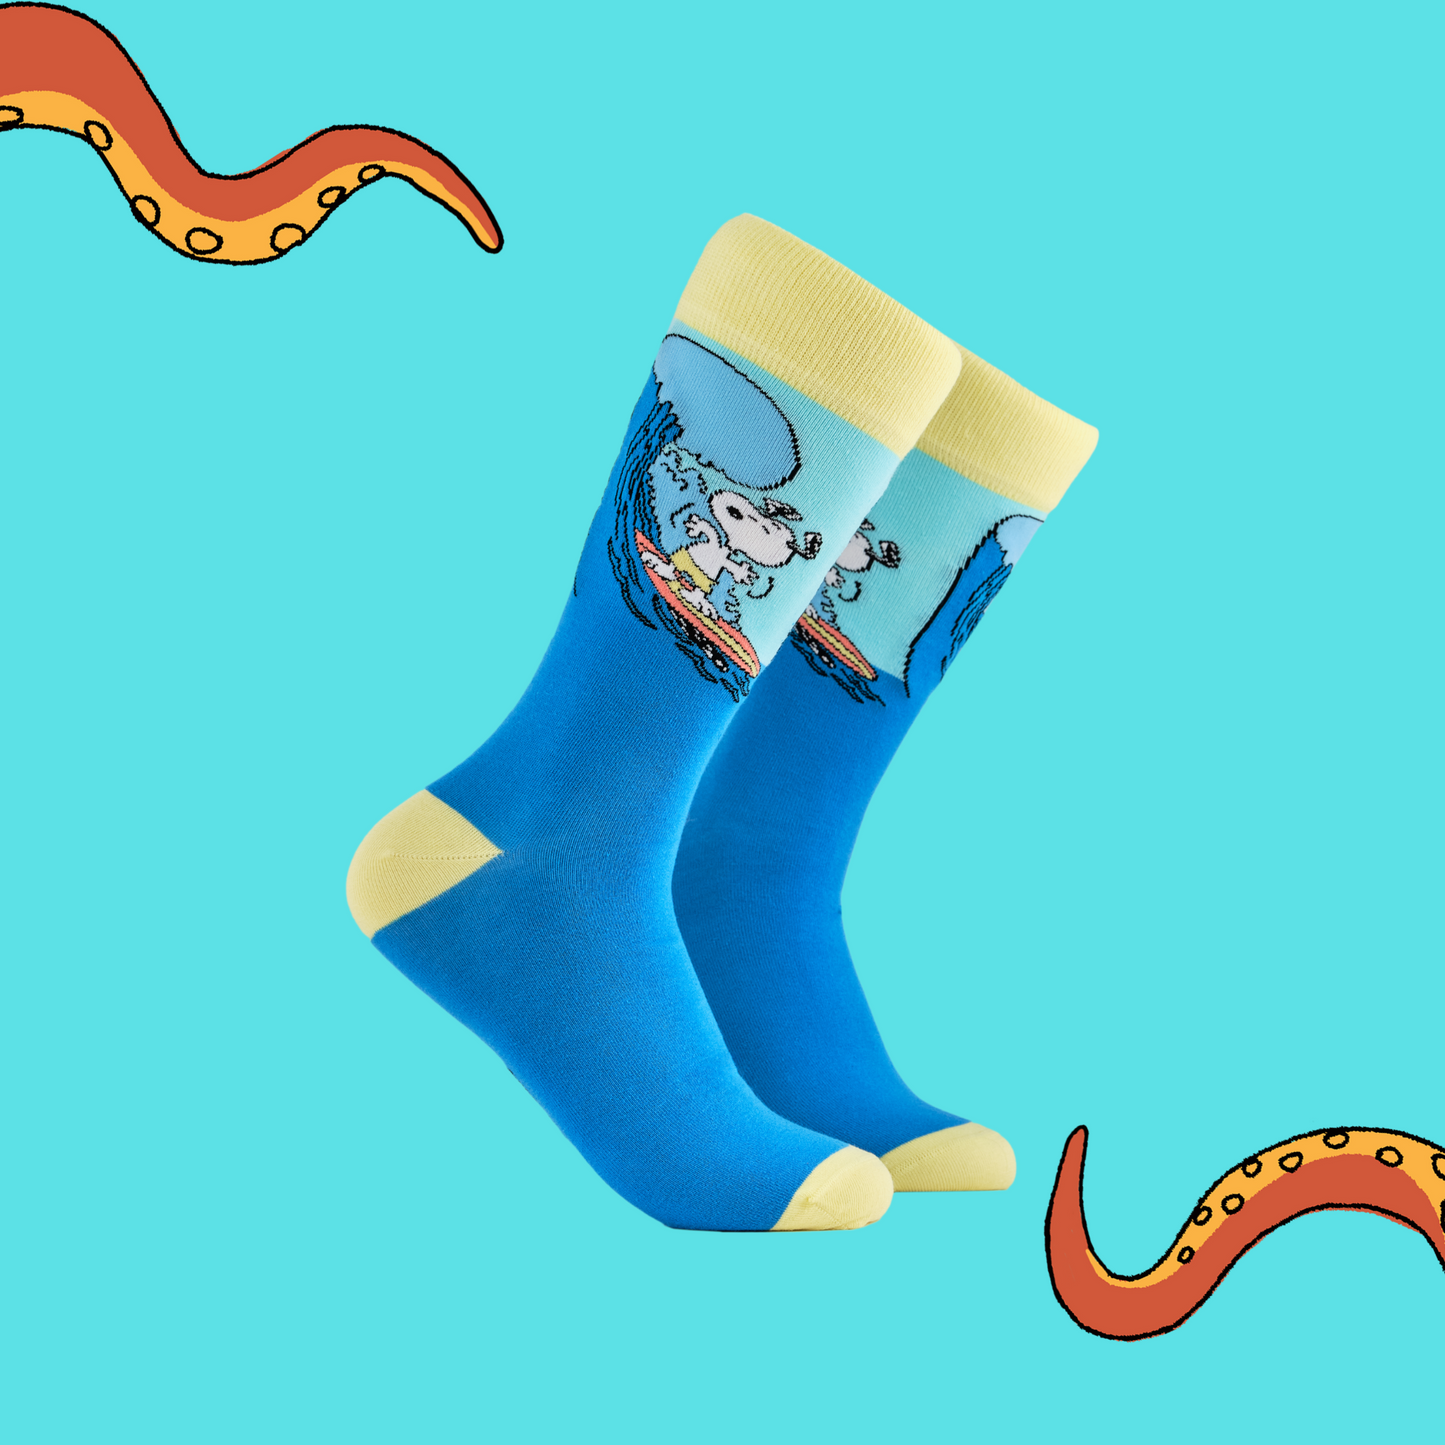 A pair of socks depicting snoopy catching some waves. Blue legs, yellow cuff, heel and toe.